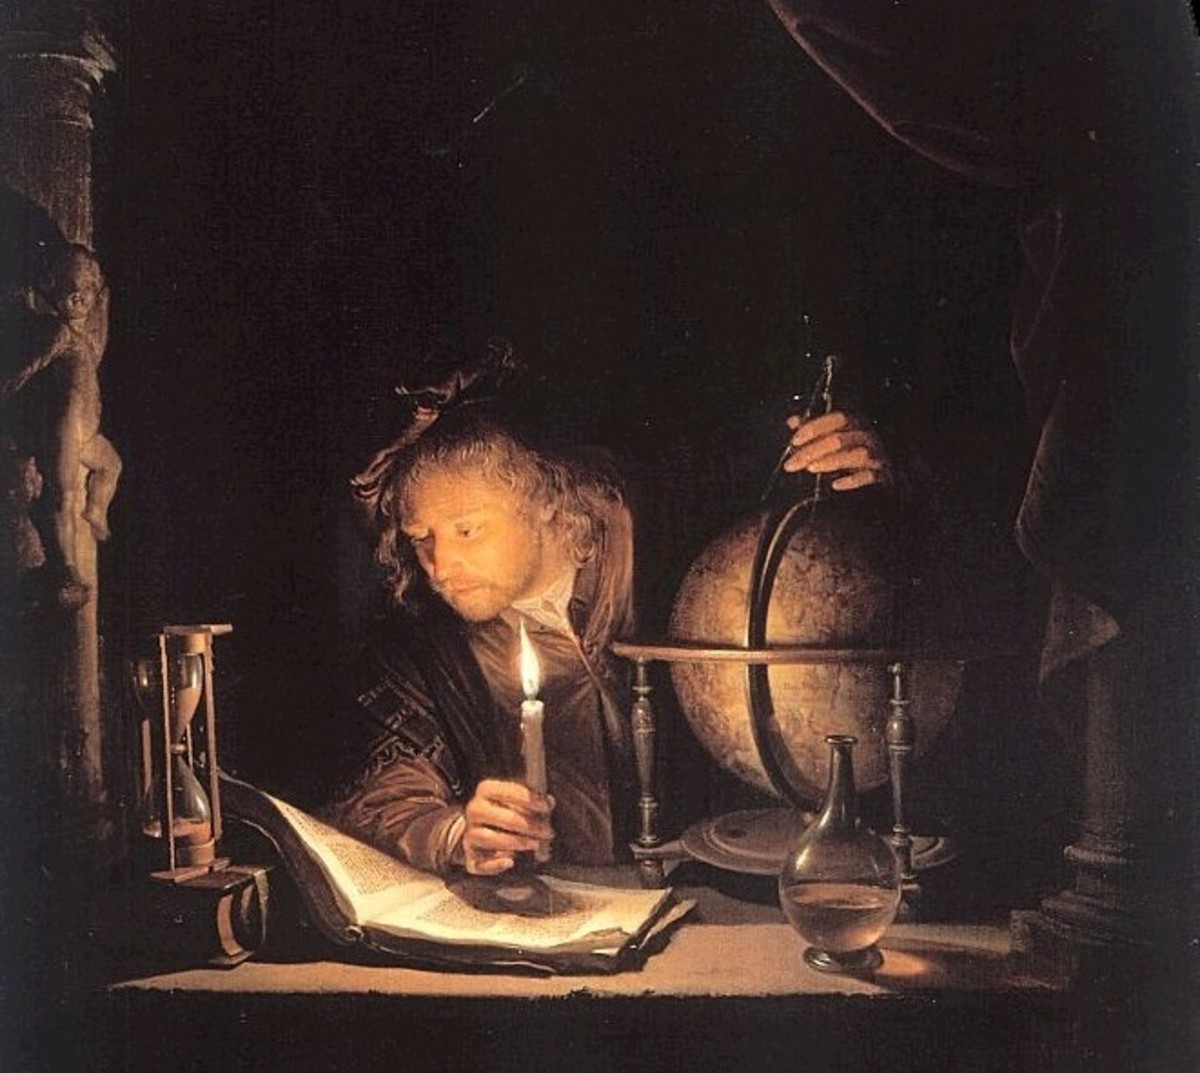 The painting “Astronomer by Candlelight” by the Dutch artist Gerrit Dou, c. 1651.